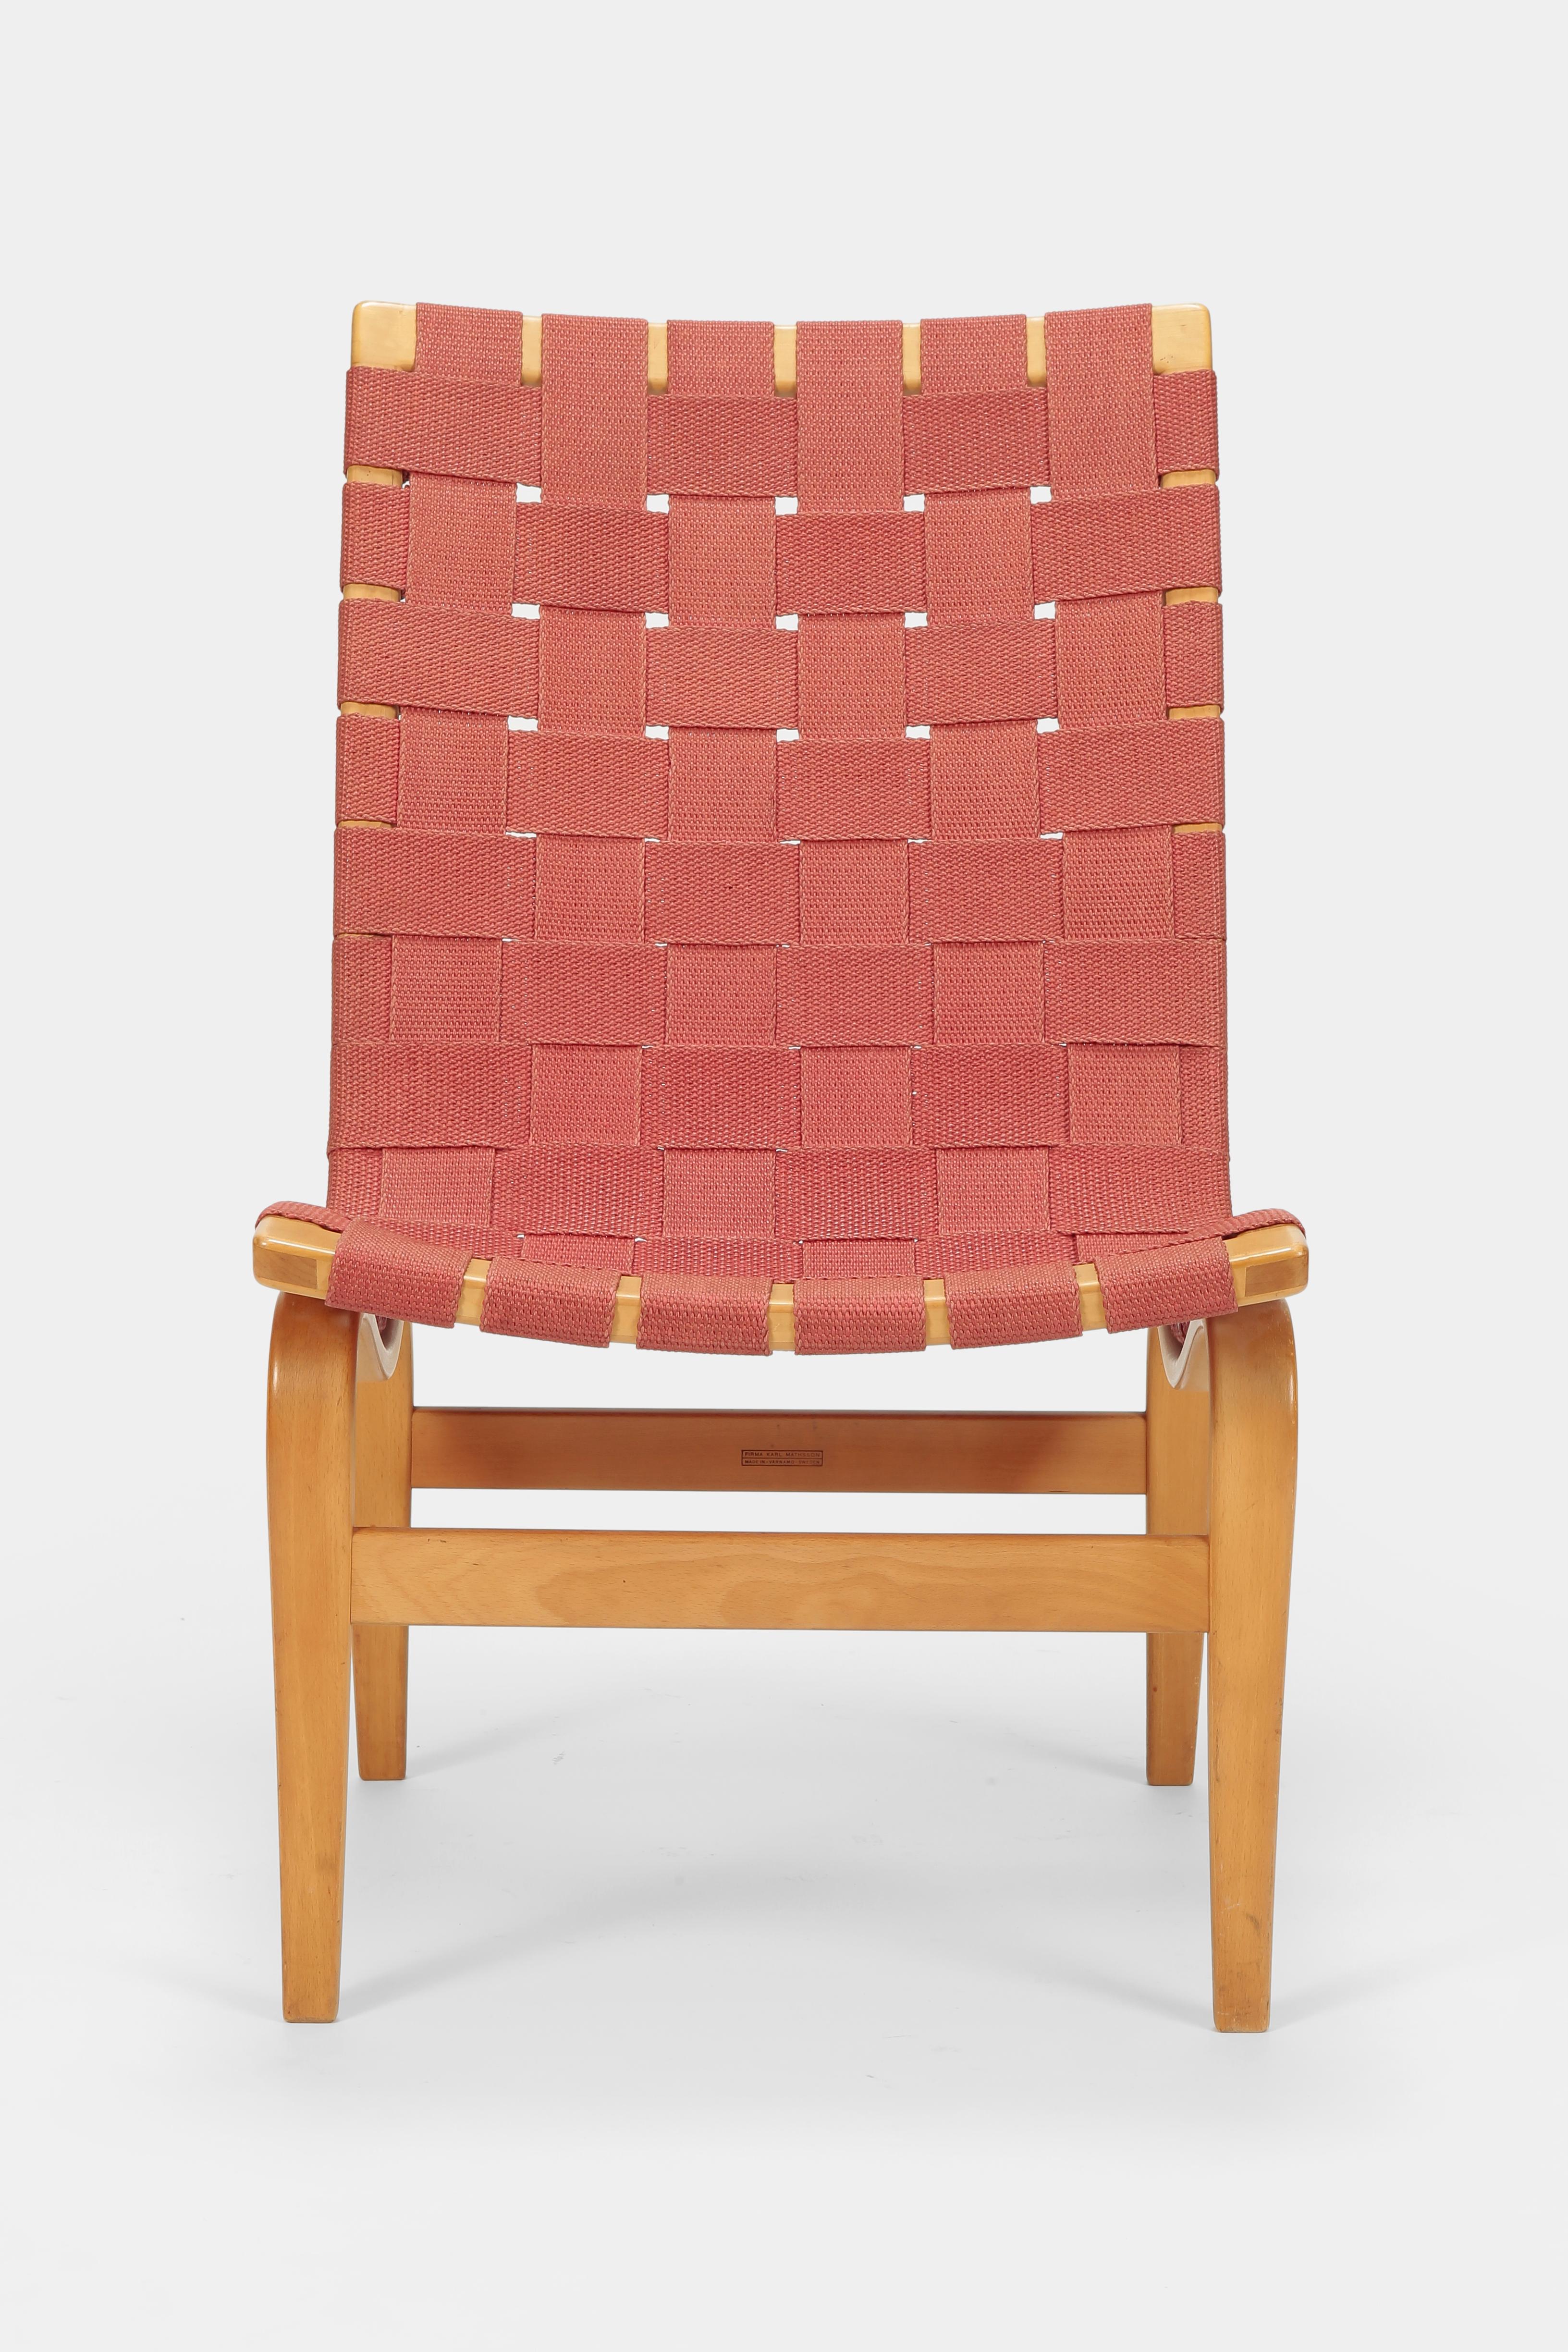 Bruno Mathsson ‘Eva’ Chair 1941 In Good Condition For Sale In Basel, CH